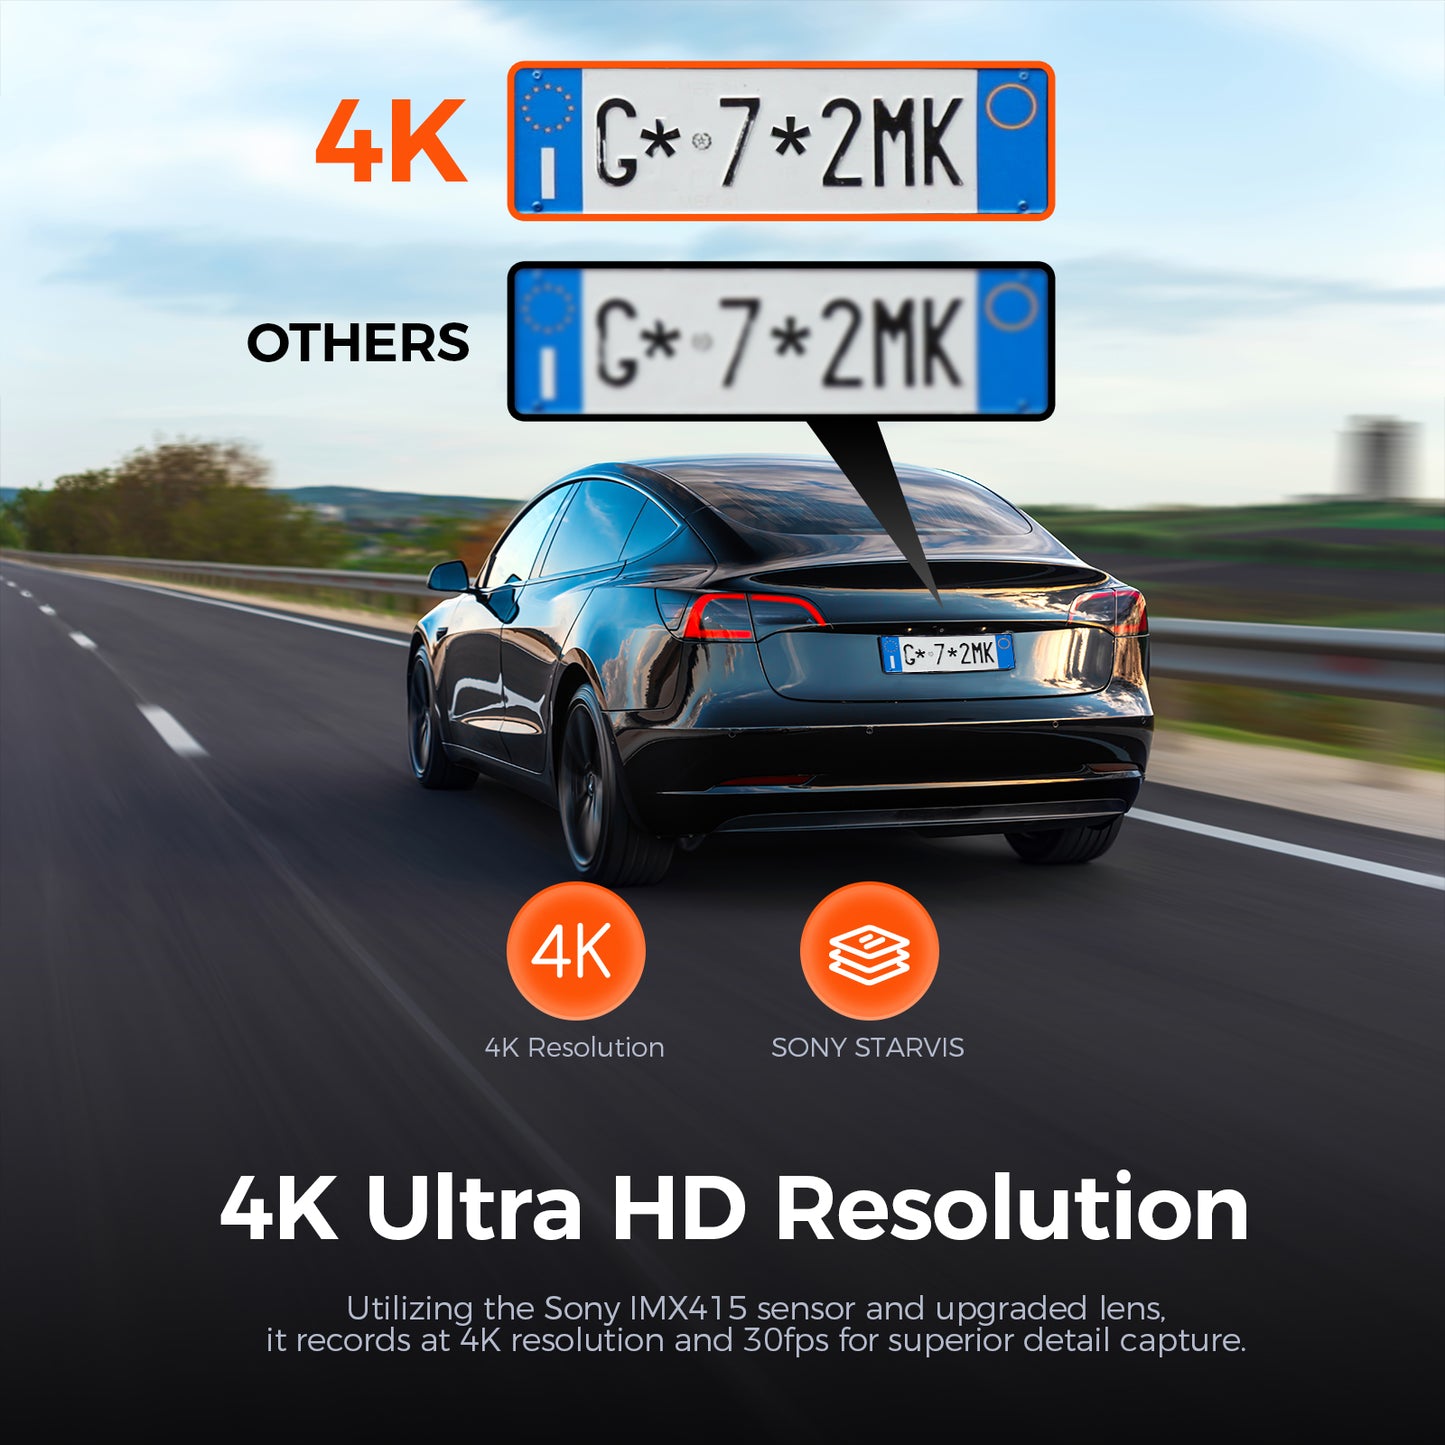 LINGDU AM100 Dash Cam - The 4K Ultra HD Car Security Camera with 24H Parking and Voice Control